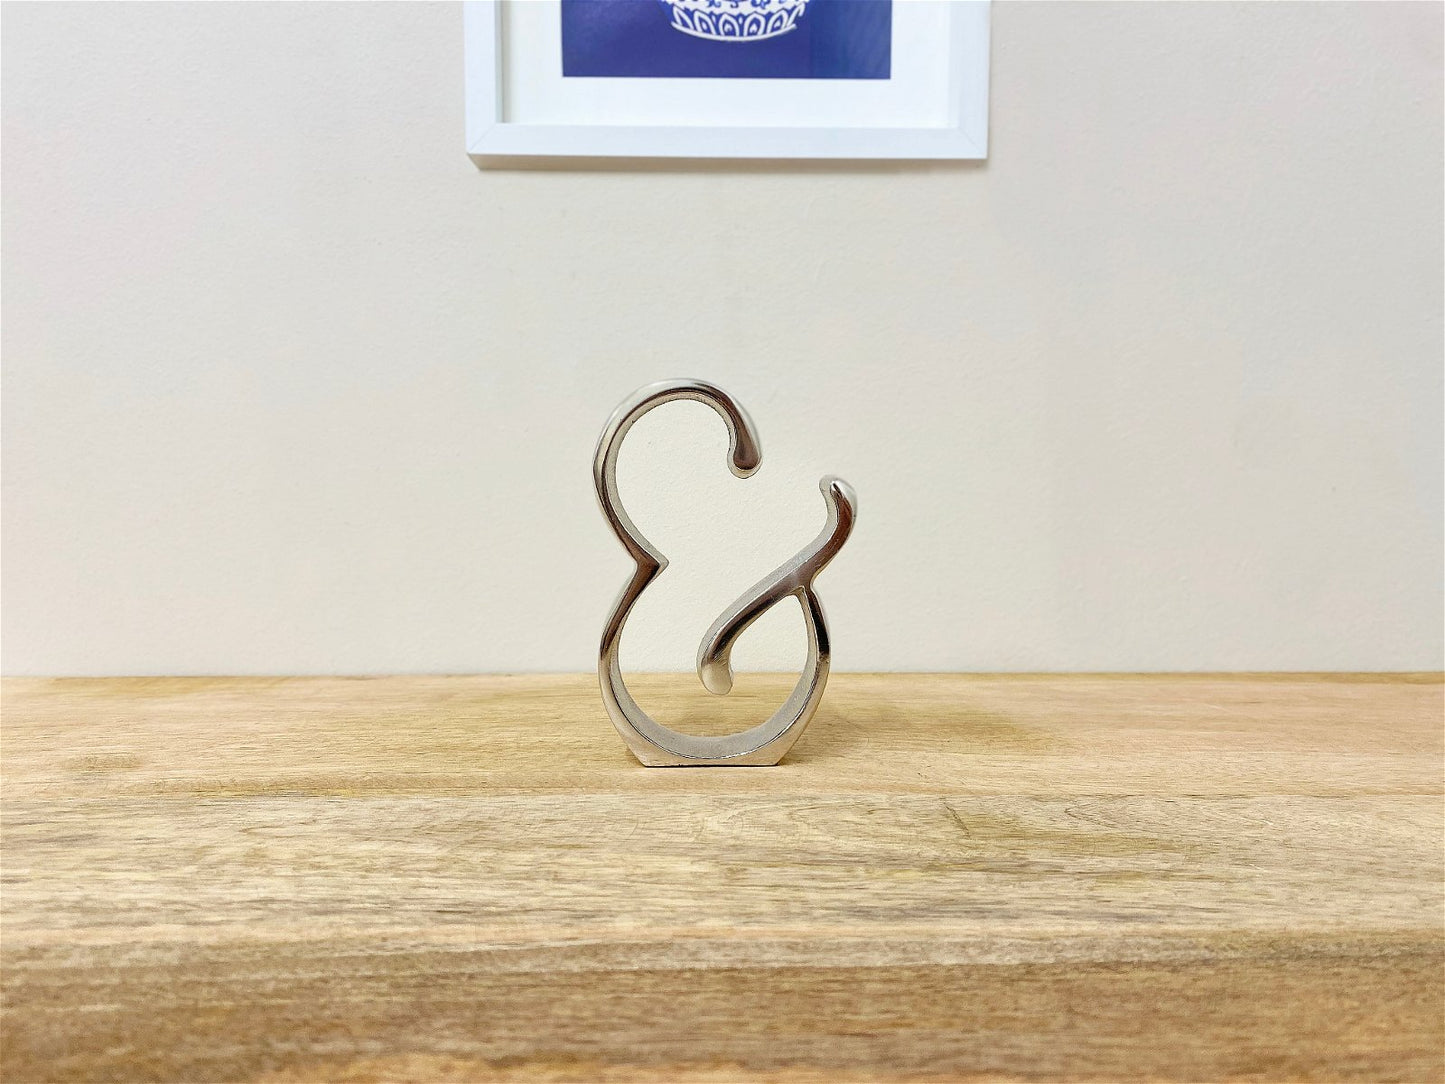 Silver Aluminium Ampersand or And Sign Ornament